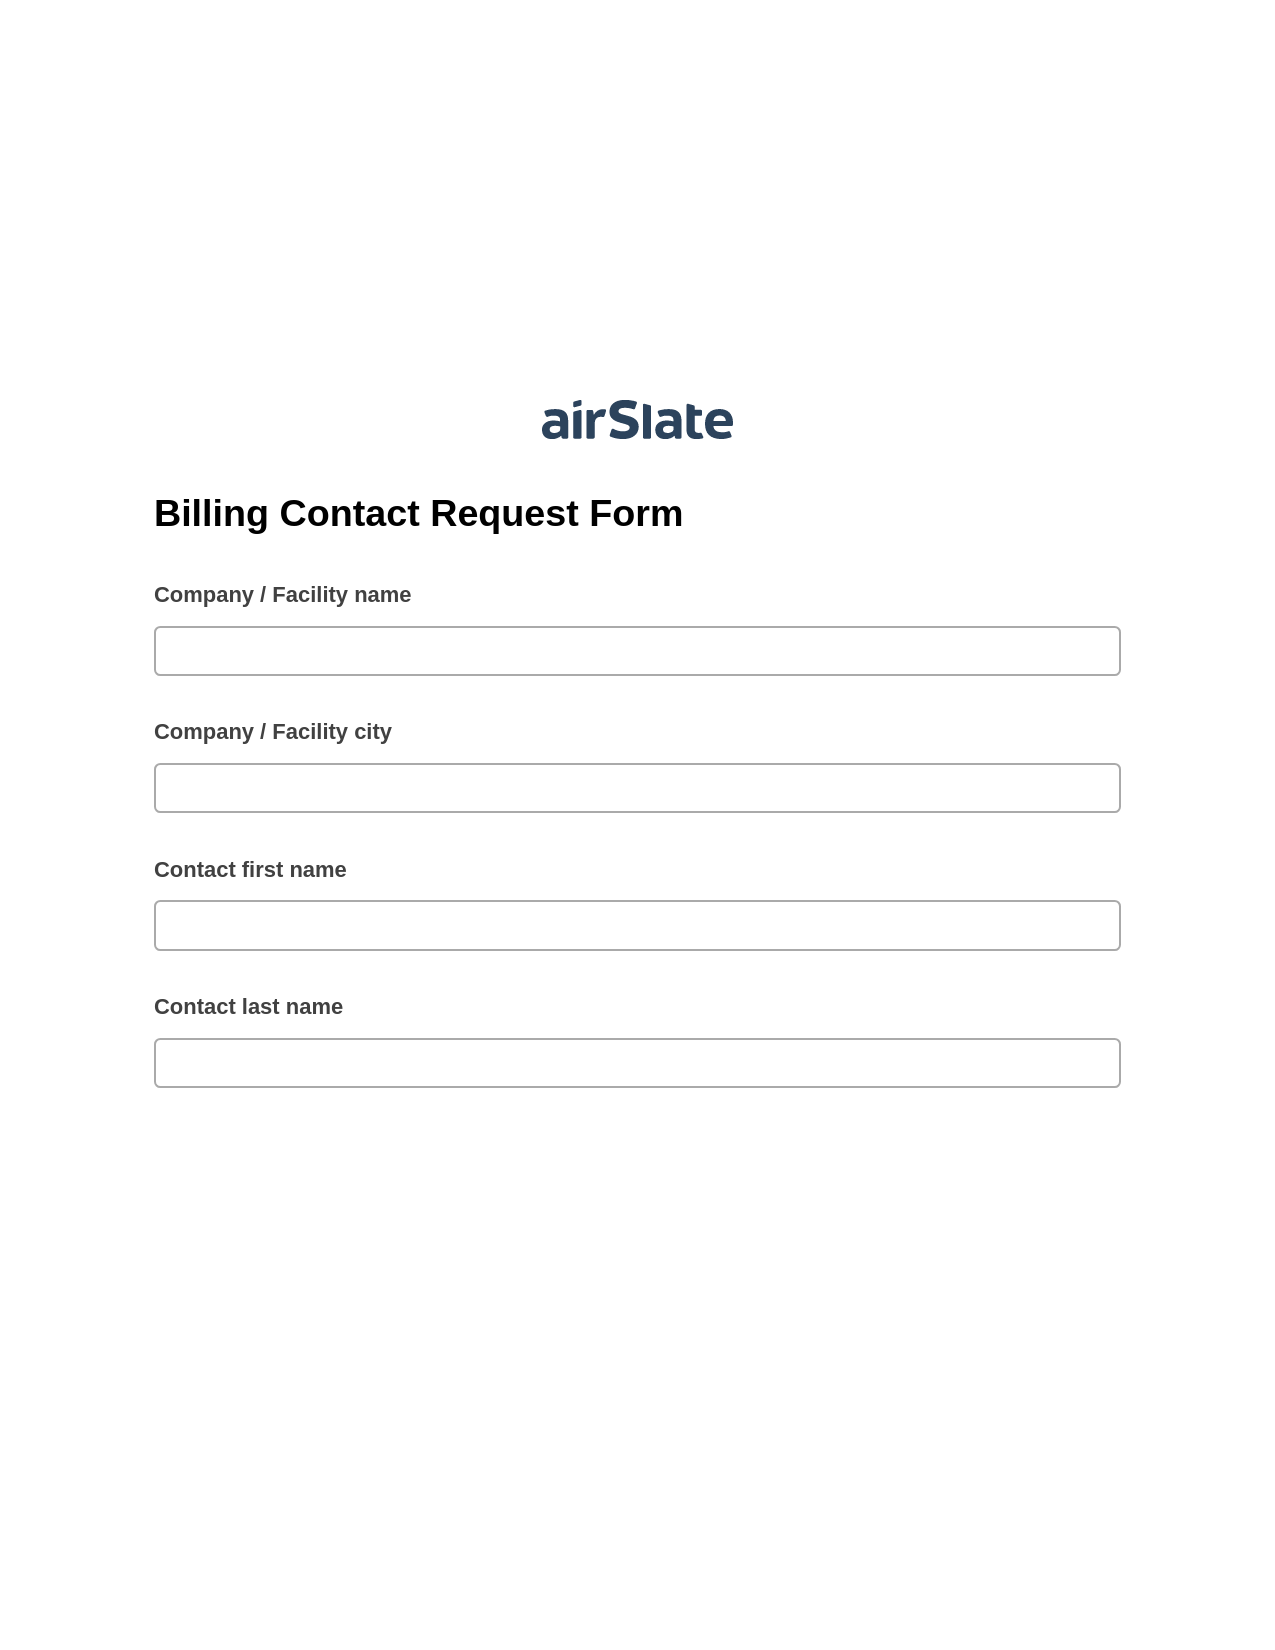 Billing Contact Request Form Pre-fill from Salesforce Record Bot, Roles Reminder Bot, Webhook Postfinish Bot